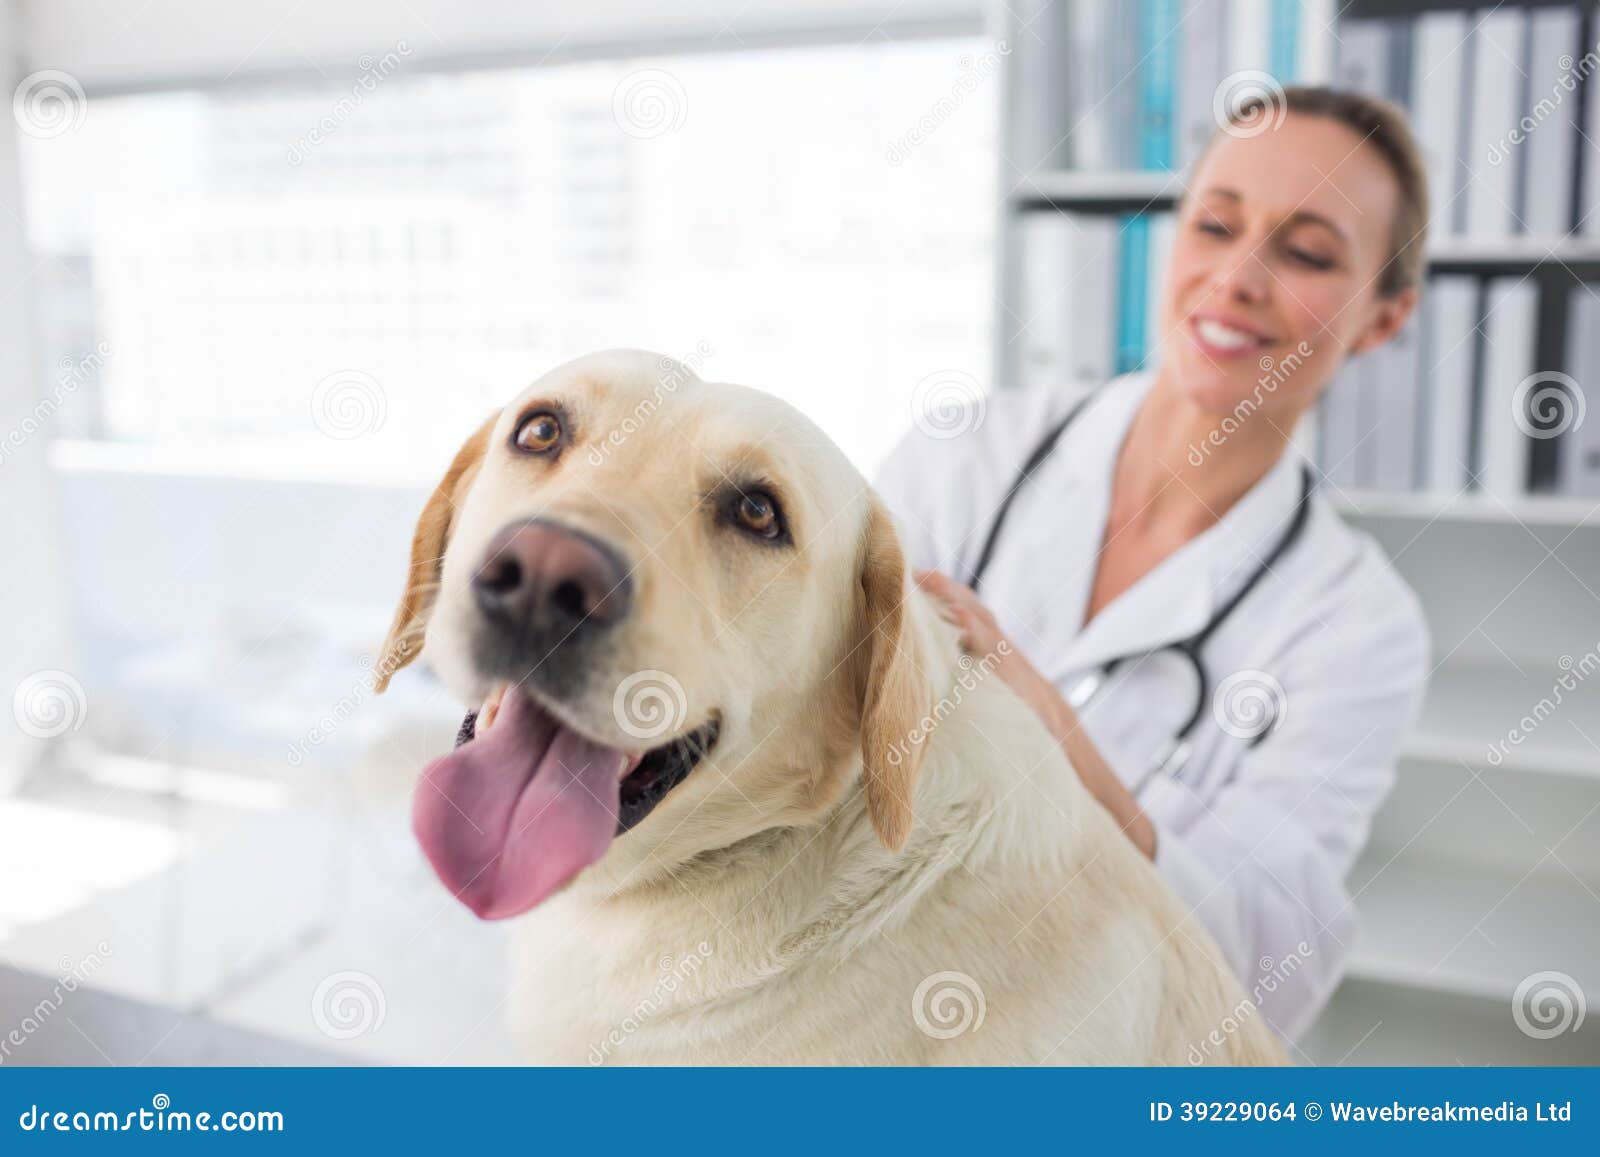 dog with female veterinarian